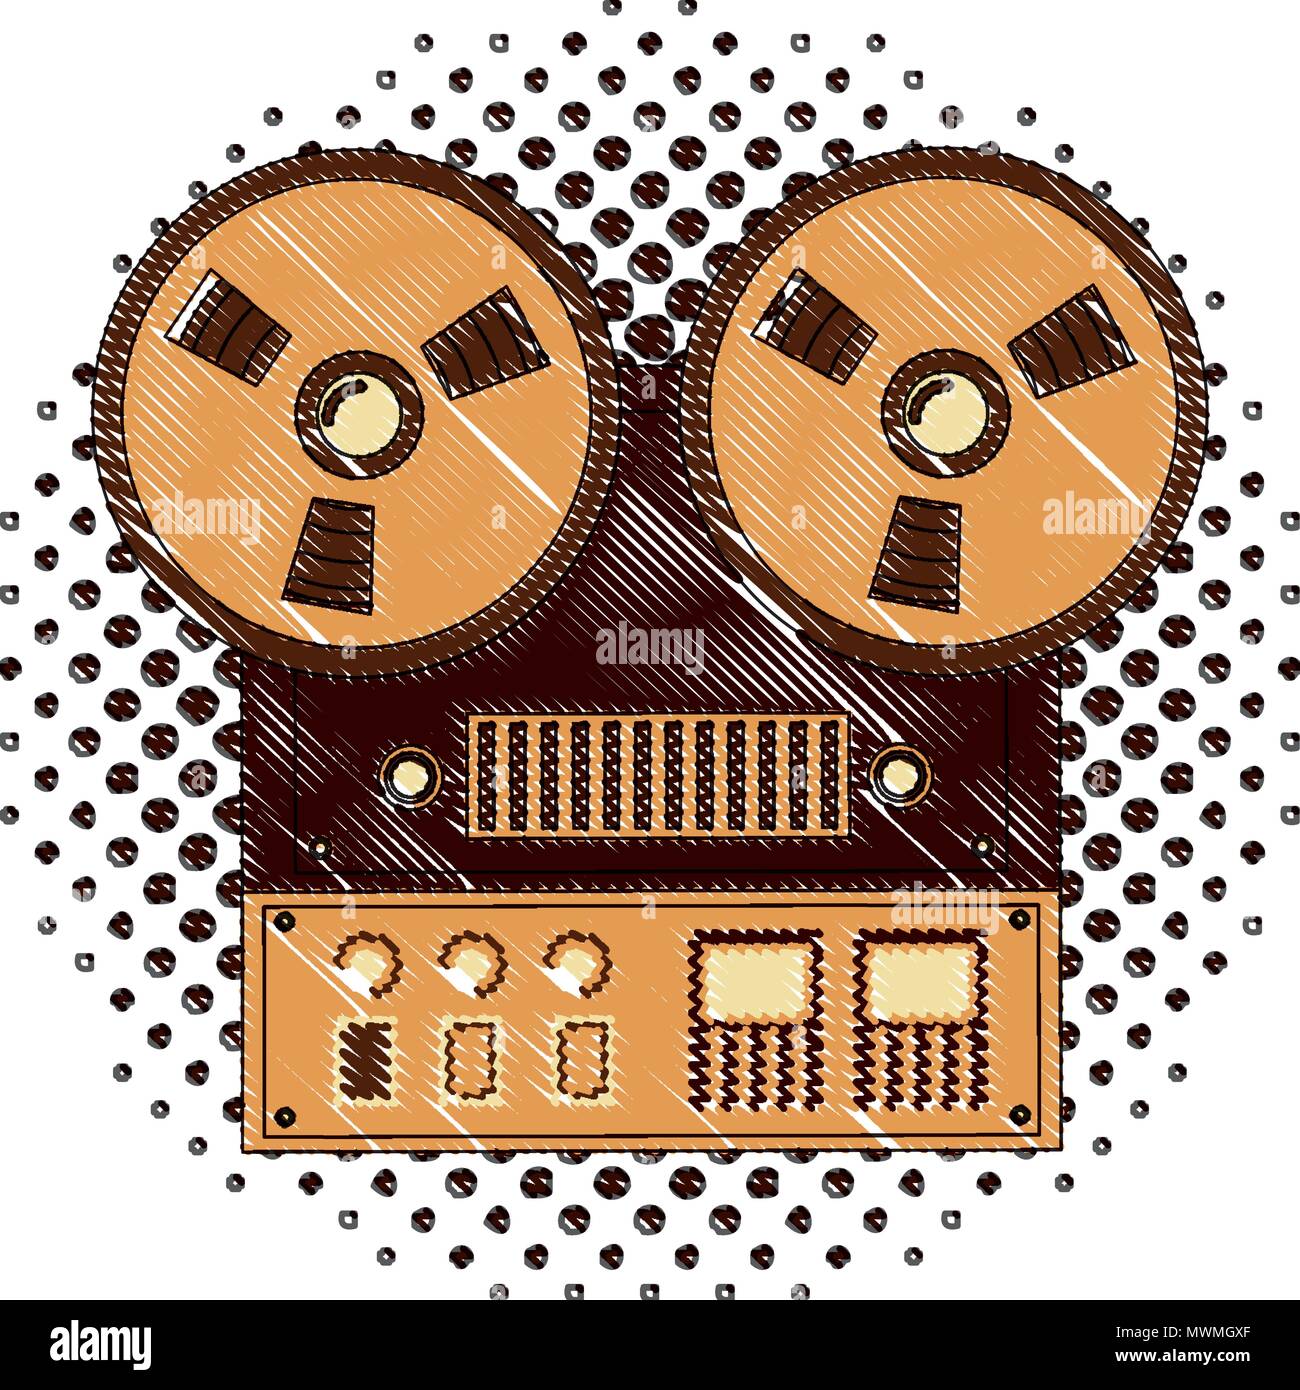 Reel-to-reel audio tape recorder. Handheld reel tape recorder, hand drawn  retro illustration, isolated on white. Suitable for banner, ad, t-shirt  design. Vintage tape spool design element Stock Vector